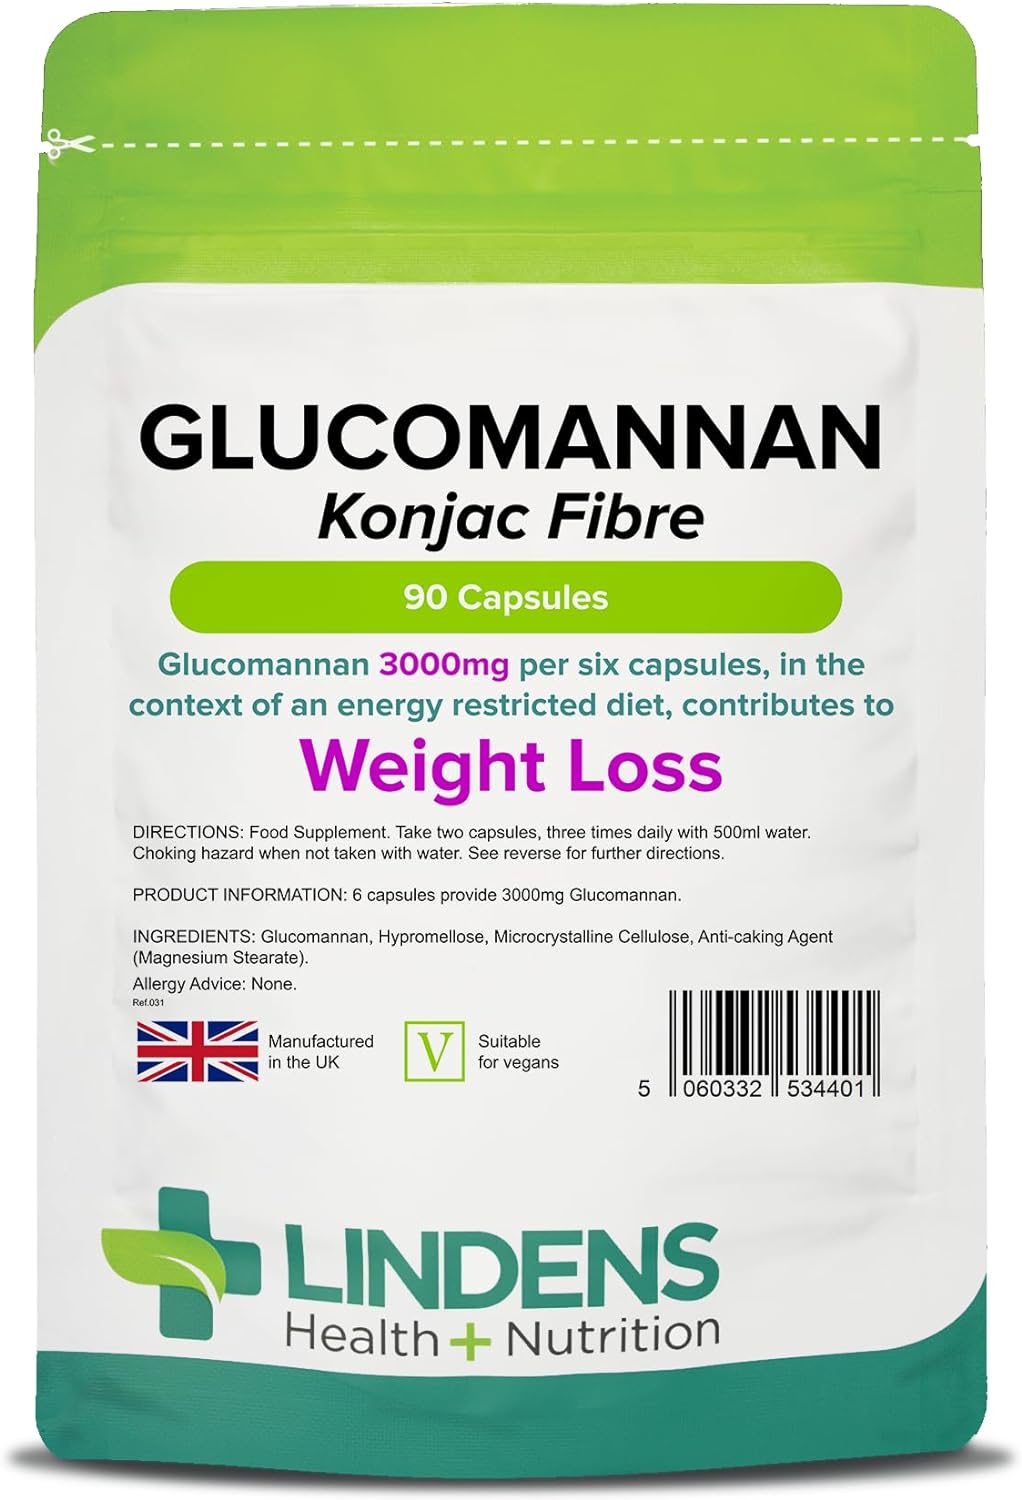 Lindens Glucomannan (Konjac Fibre) Capsules - 3,000mg Per Serving - 90 Pack - Weight Loss Aid - Contributes Towards The Reduction of Appetite - Weight Loss Supplement - Letterbox Friendly